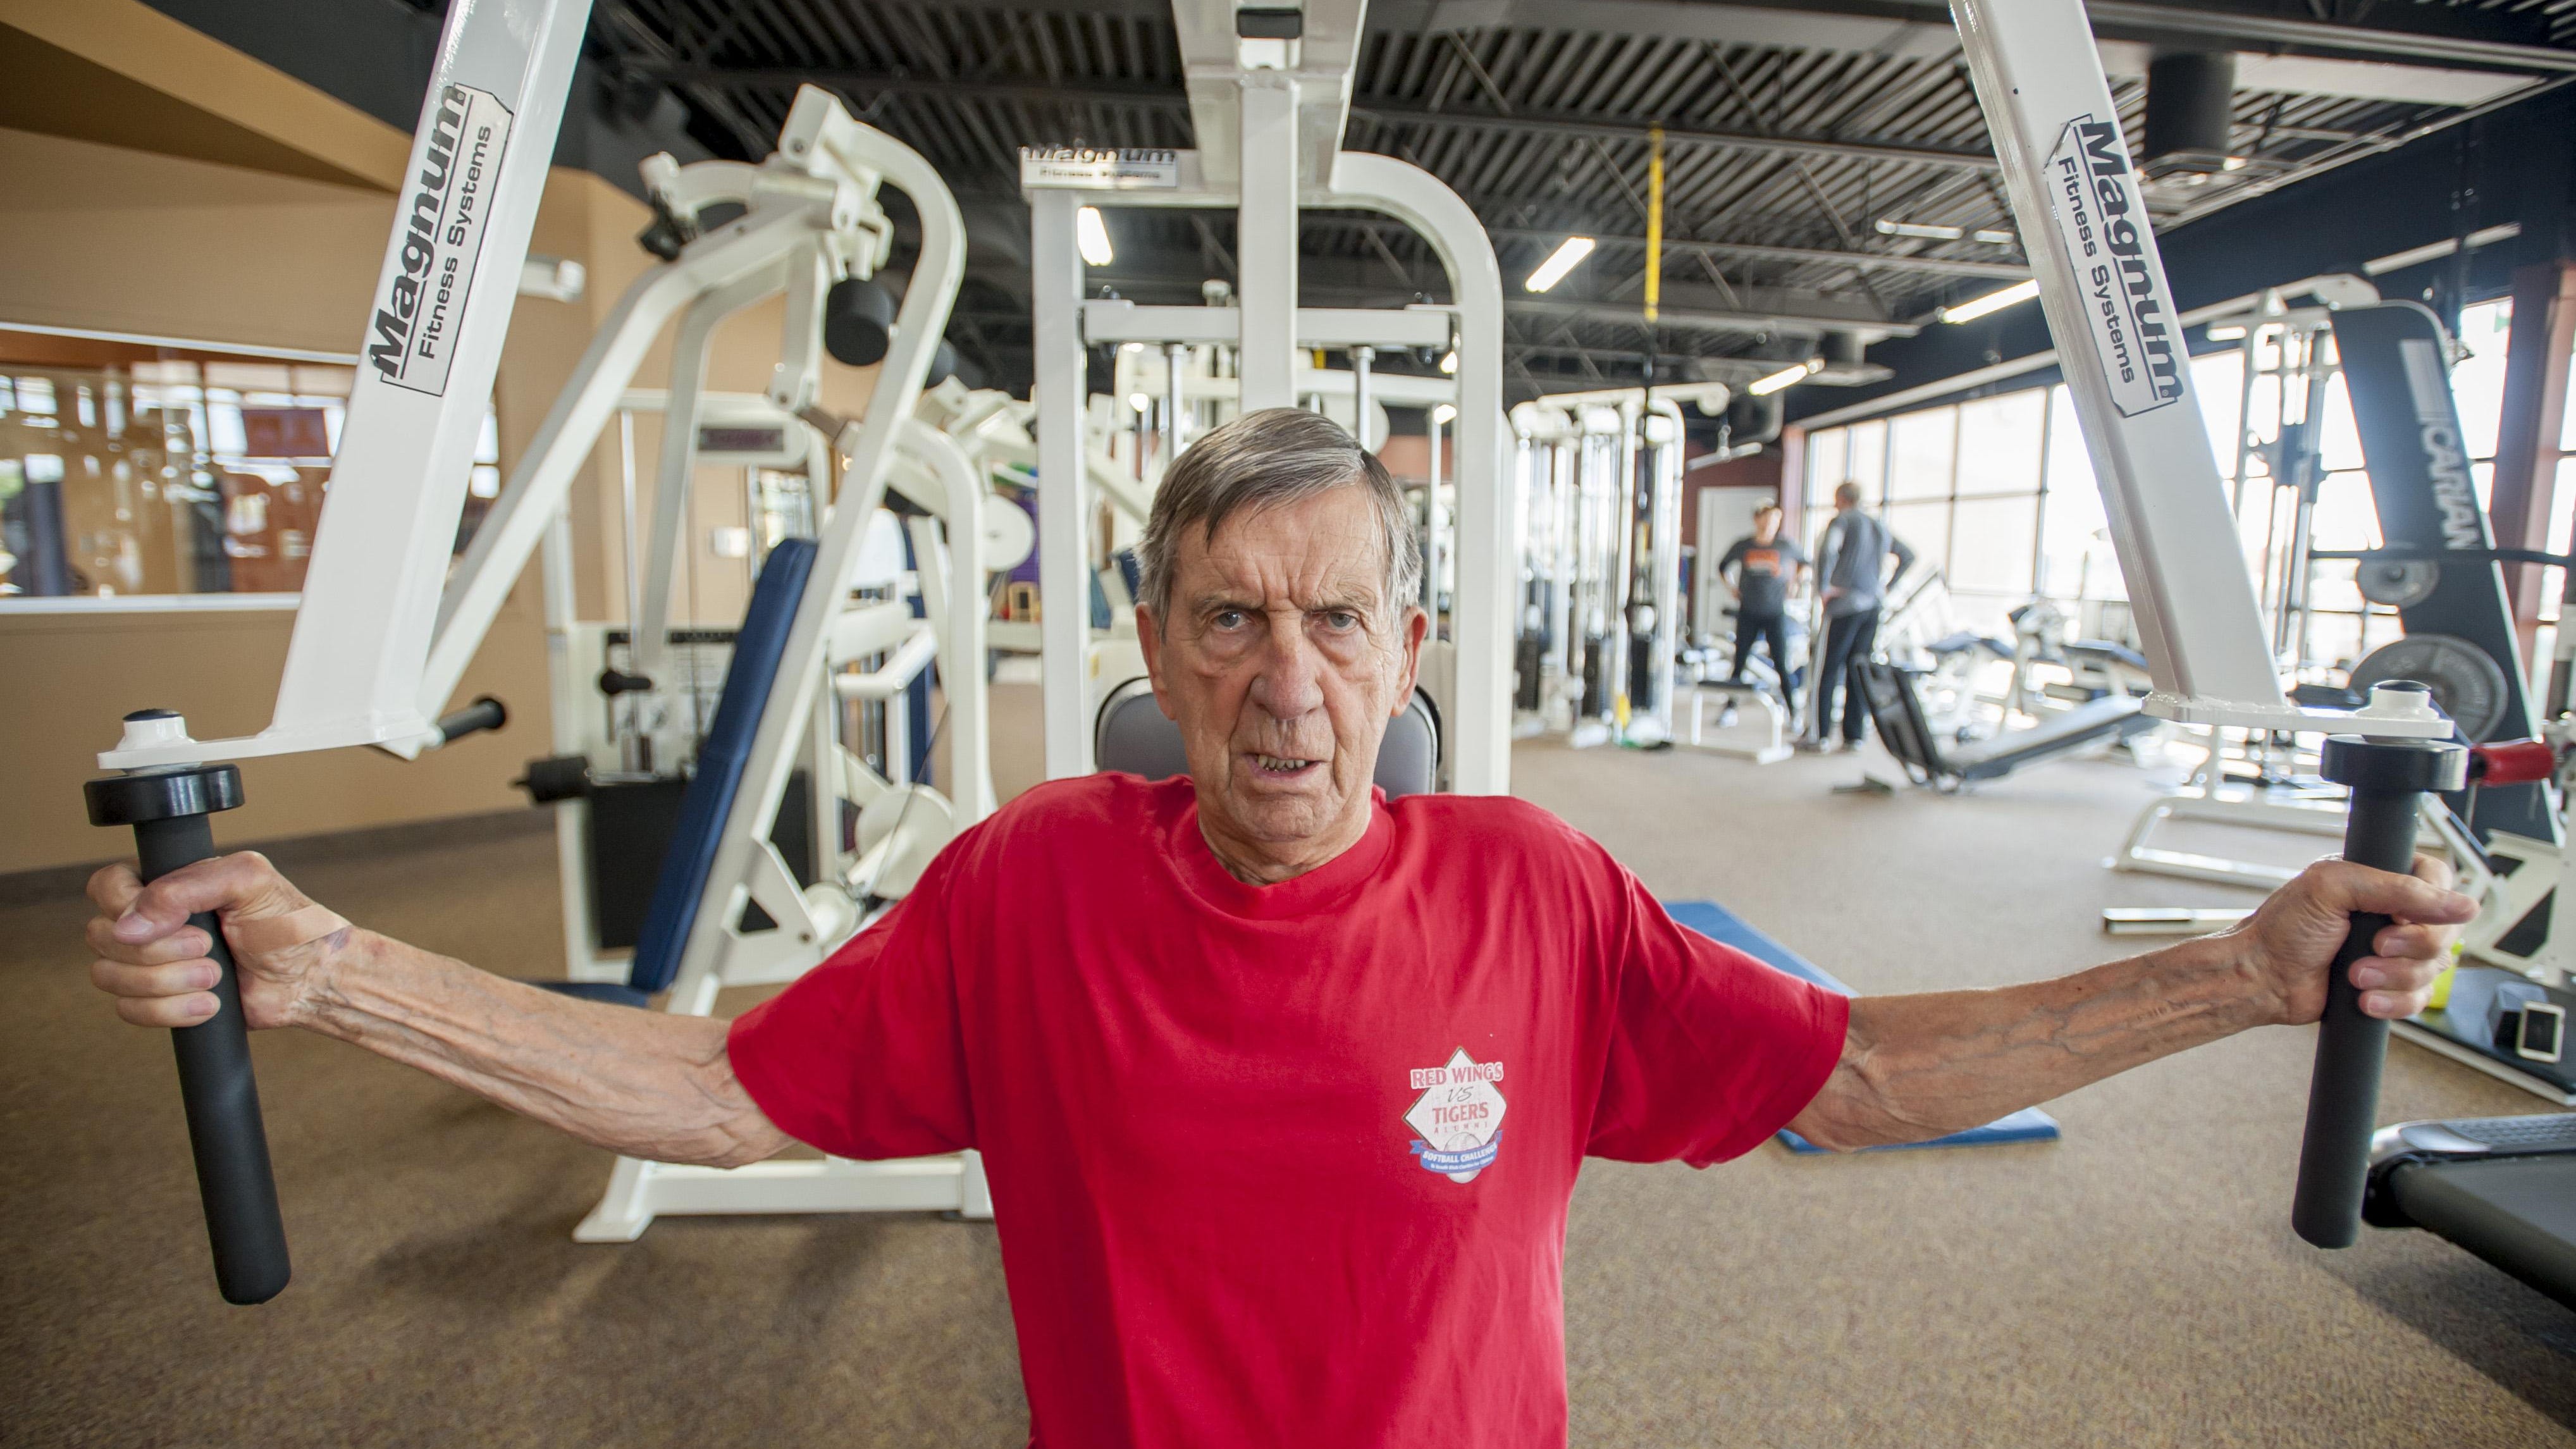 Ted Lindsay works out at The Training Room inside the Troy Sports Center in 2015. “I was blessed with a brain that recognized that the body is a muscle. And from the bottom of your feet to the top of your head, if you don’t work it out, it becomes flab. And flab becomes useless,” he said.